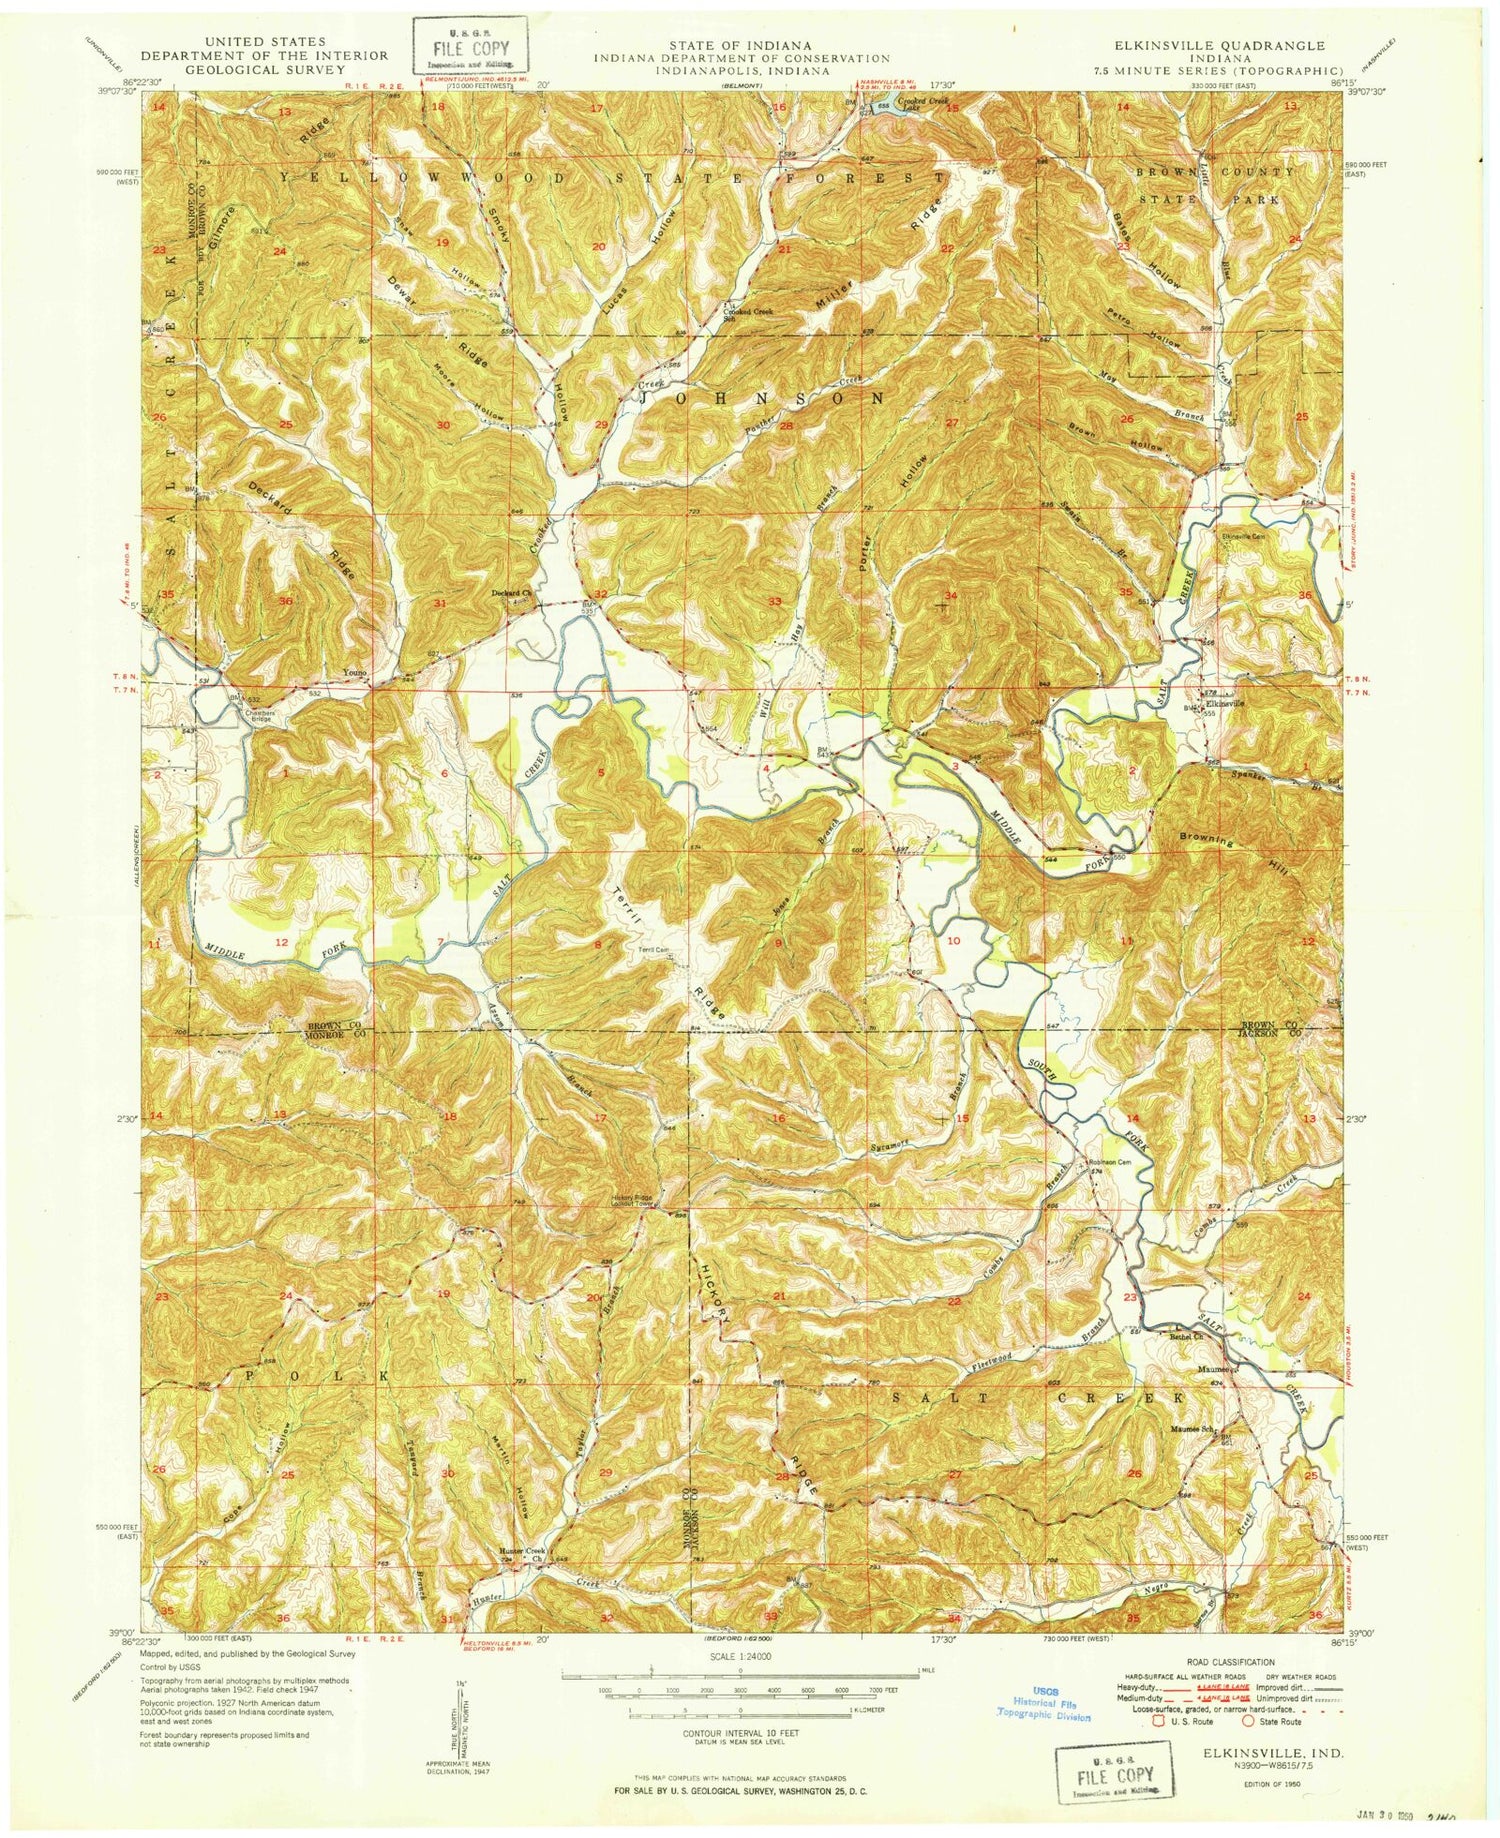 USGS Classic Elkinsville Indiana 7.5'x7.5' Topo Map Image